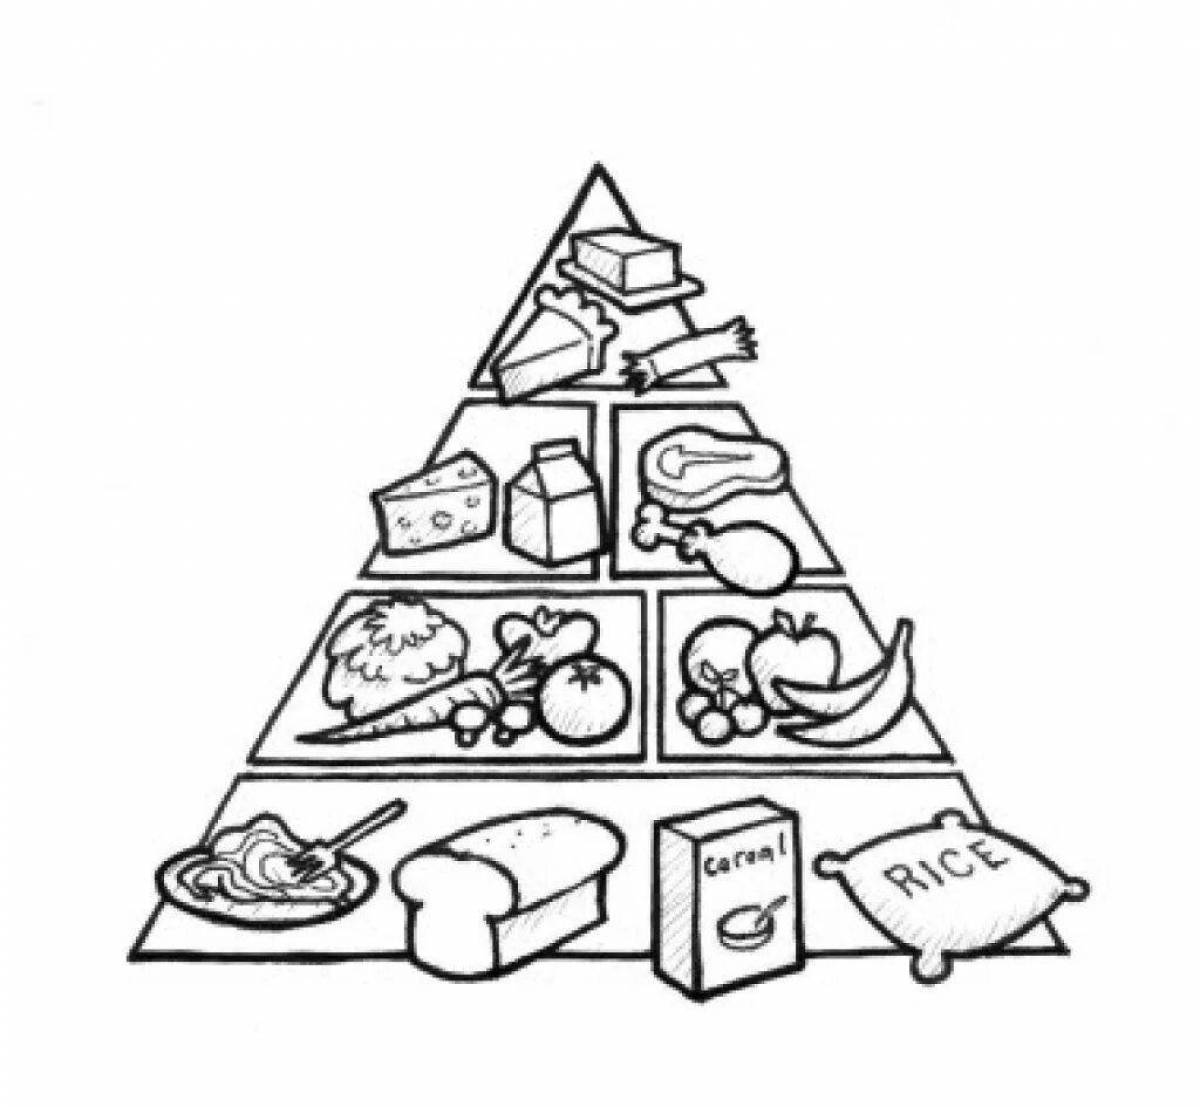 Coloring book for proper nutrition